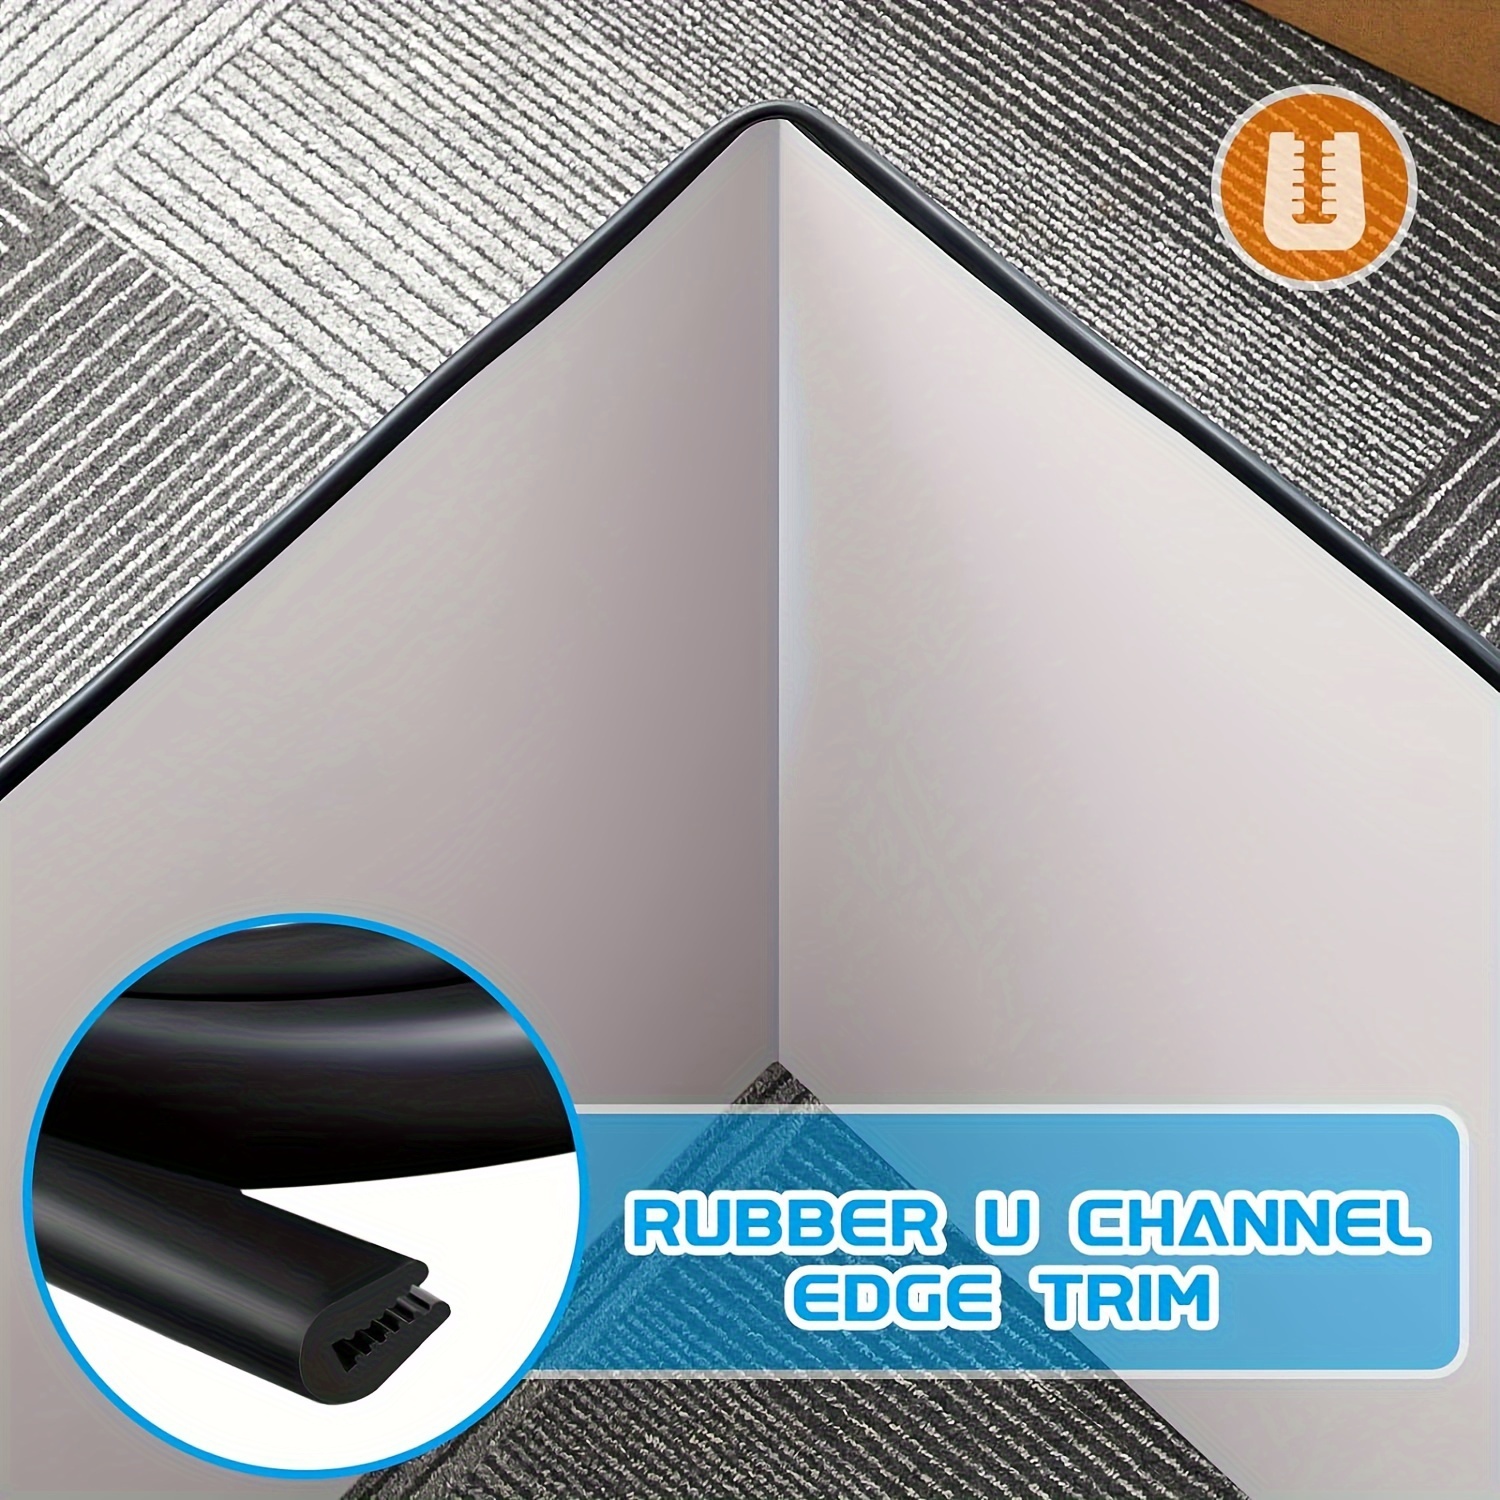 14 8 Feet Rubber Edge Trim Black U Channel Edge Seal Fits Edge Up To 1 16  Inch 1 6mm Metal Edge Protector For Windows Hatches Lockers Panels, Free  Shipping On Items Shipped From Temu